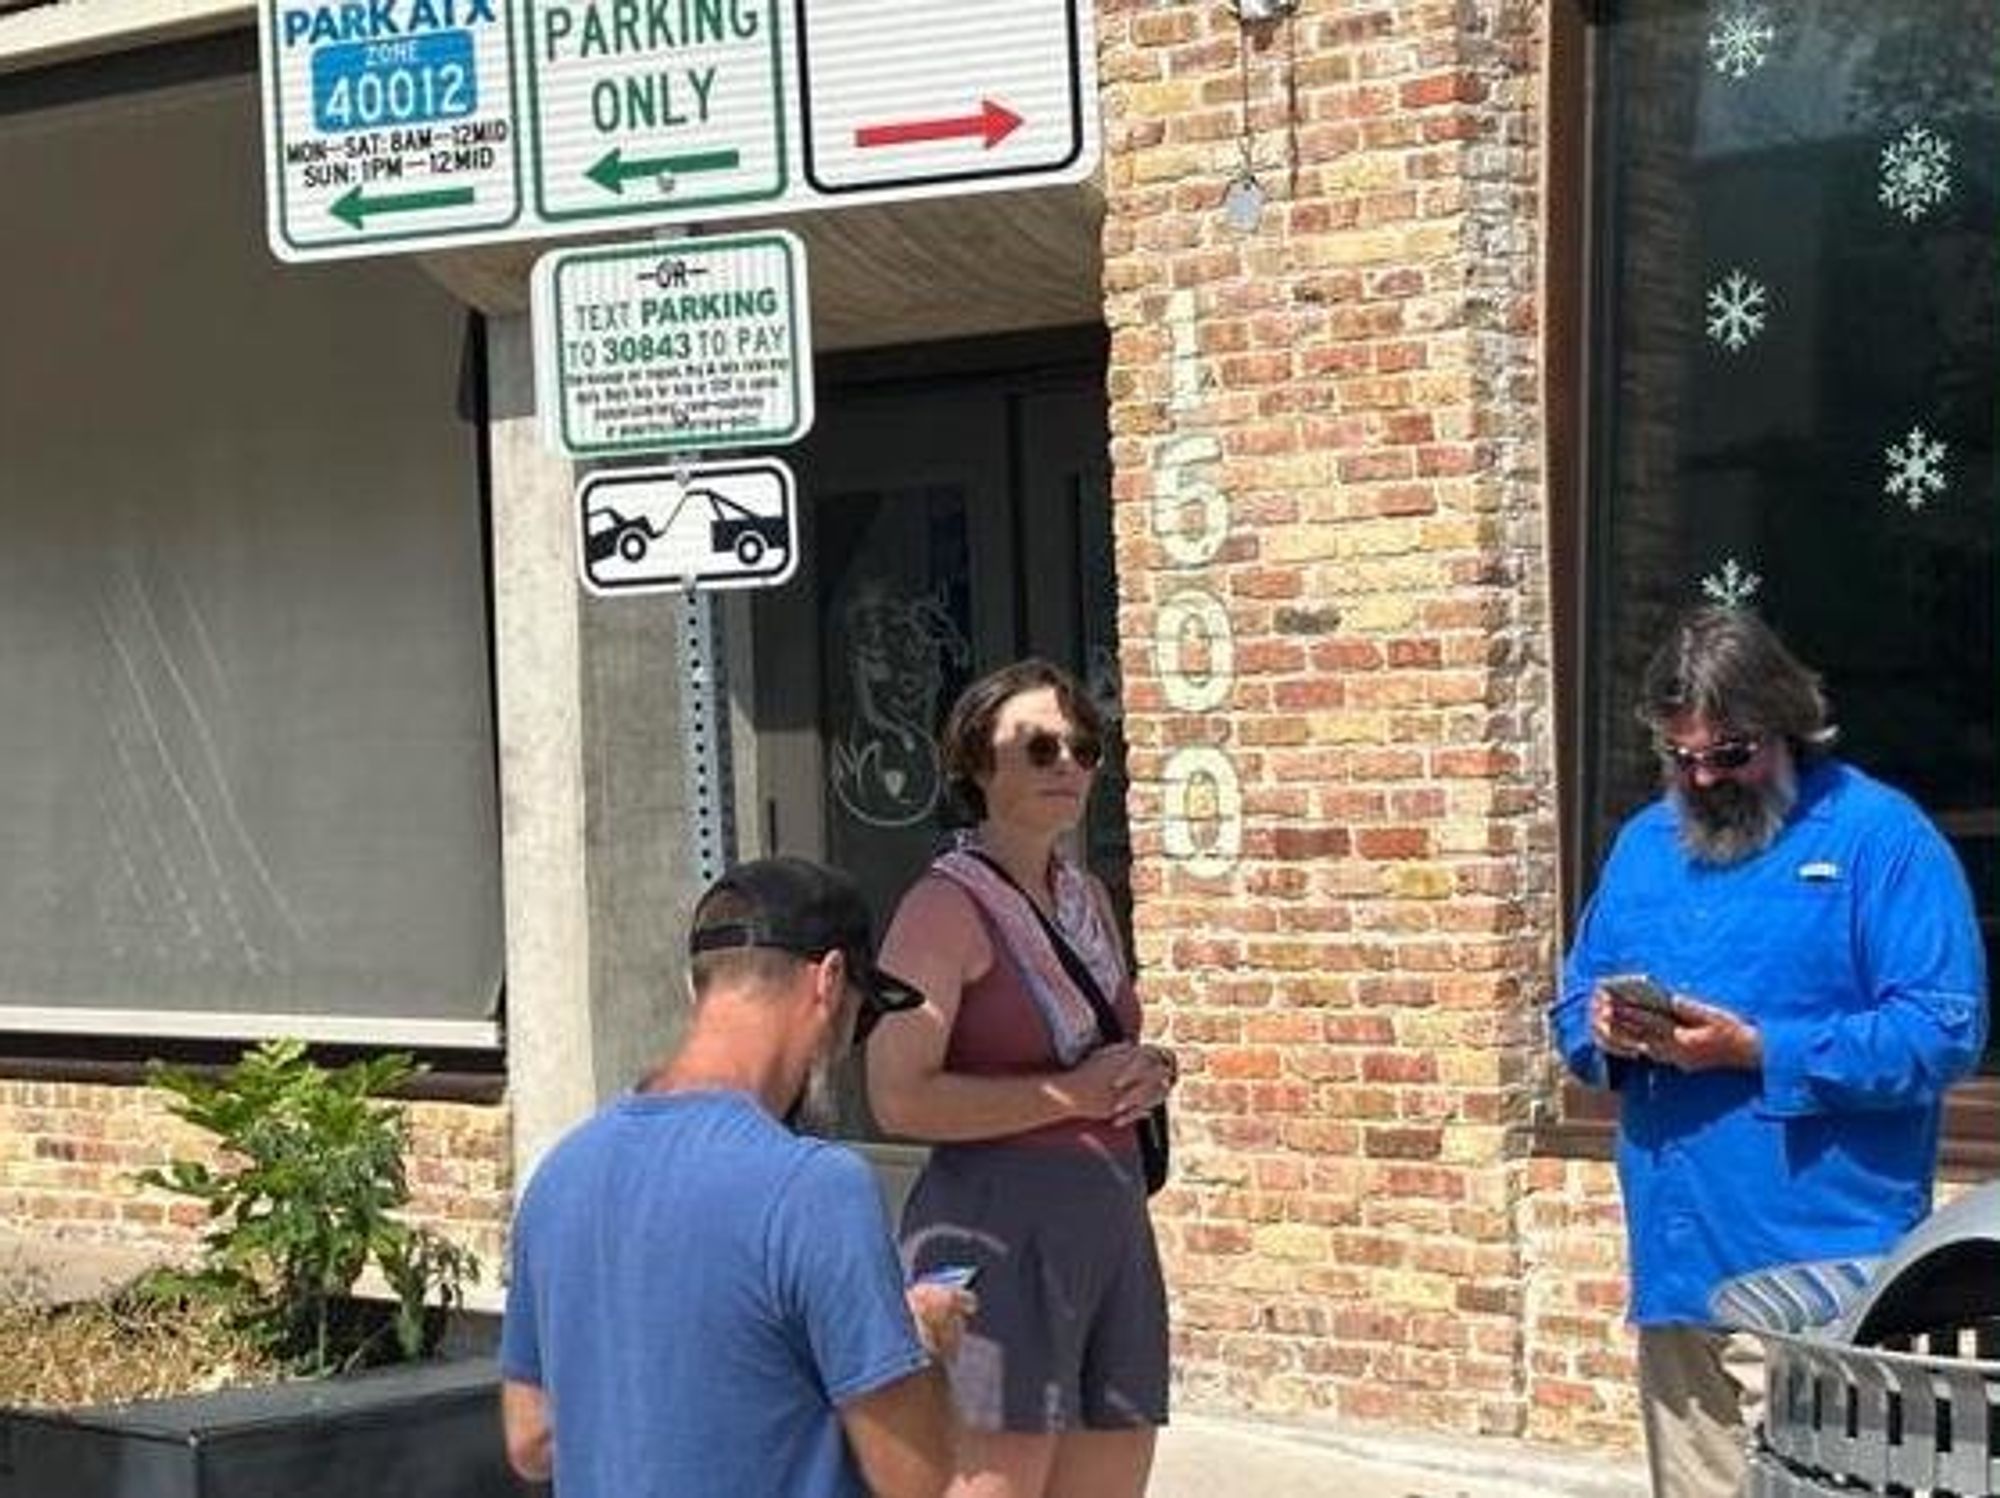 People paying for parking on South Congress Avenue in Austin